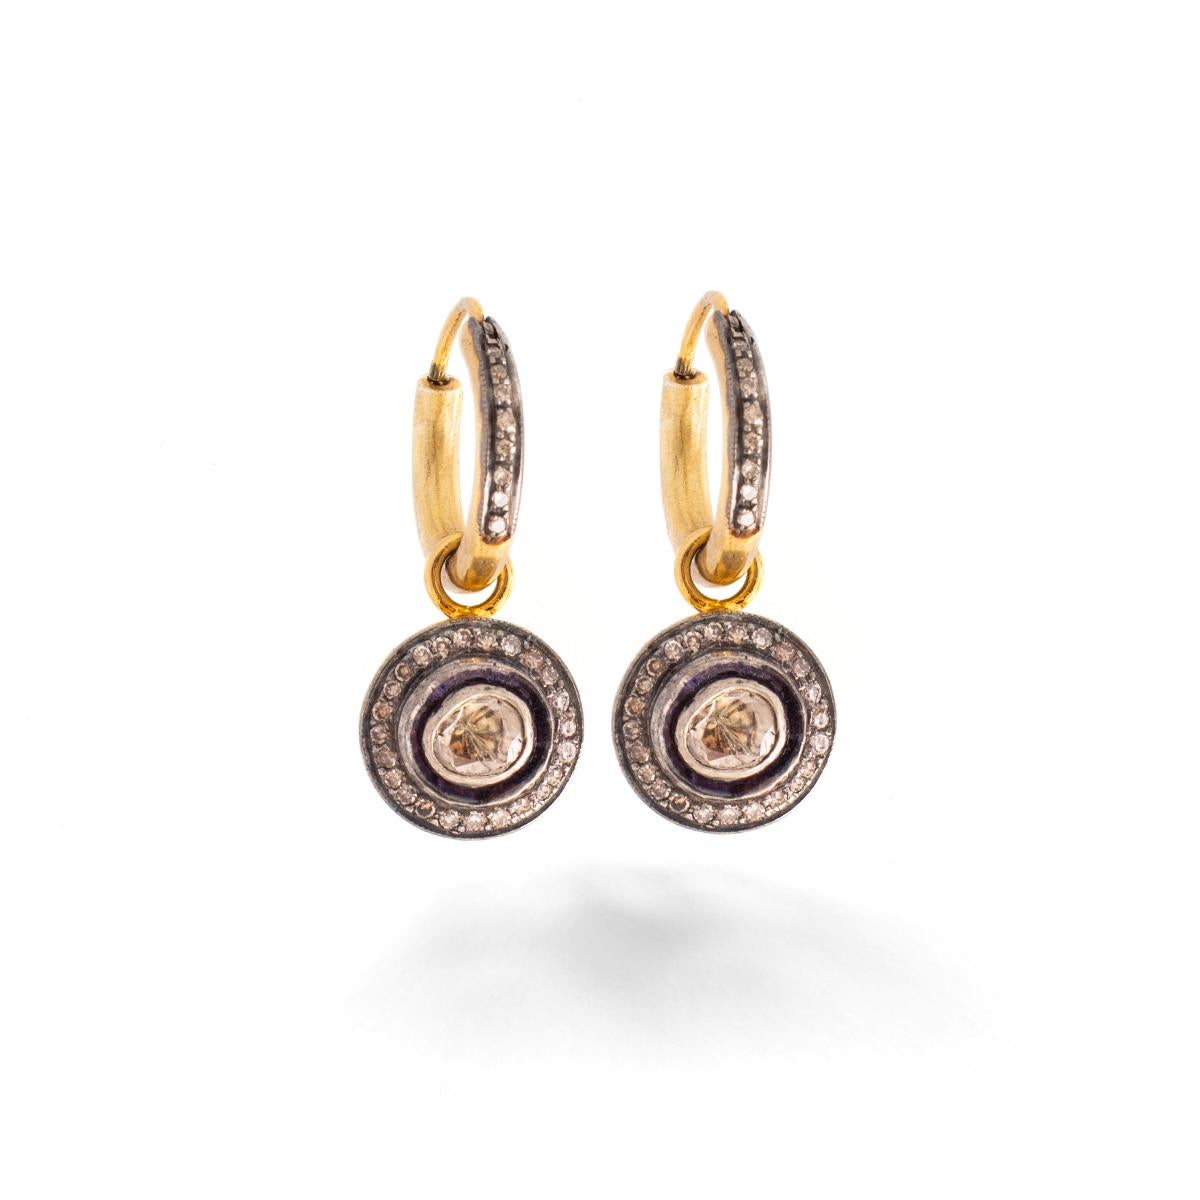 Contemporary Indian Diamond Silver Yellow Gold Earrings.
Yellow gold hoops holding diamond pendant.
Uncut Diamond Diameter: from 4.55 to 5.16 millimeters.
Total length: 3.00 centimeters.
Gross weight: 7.01 grams.